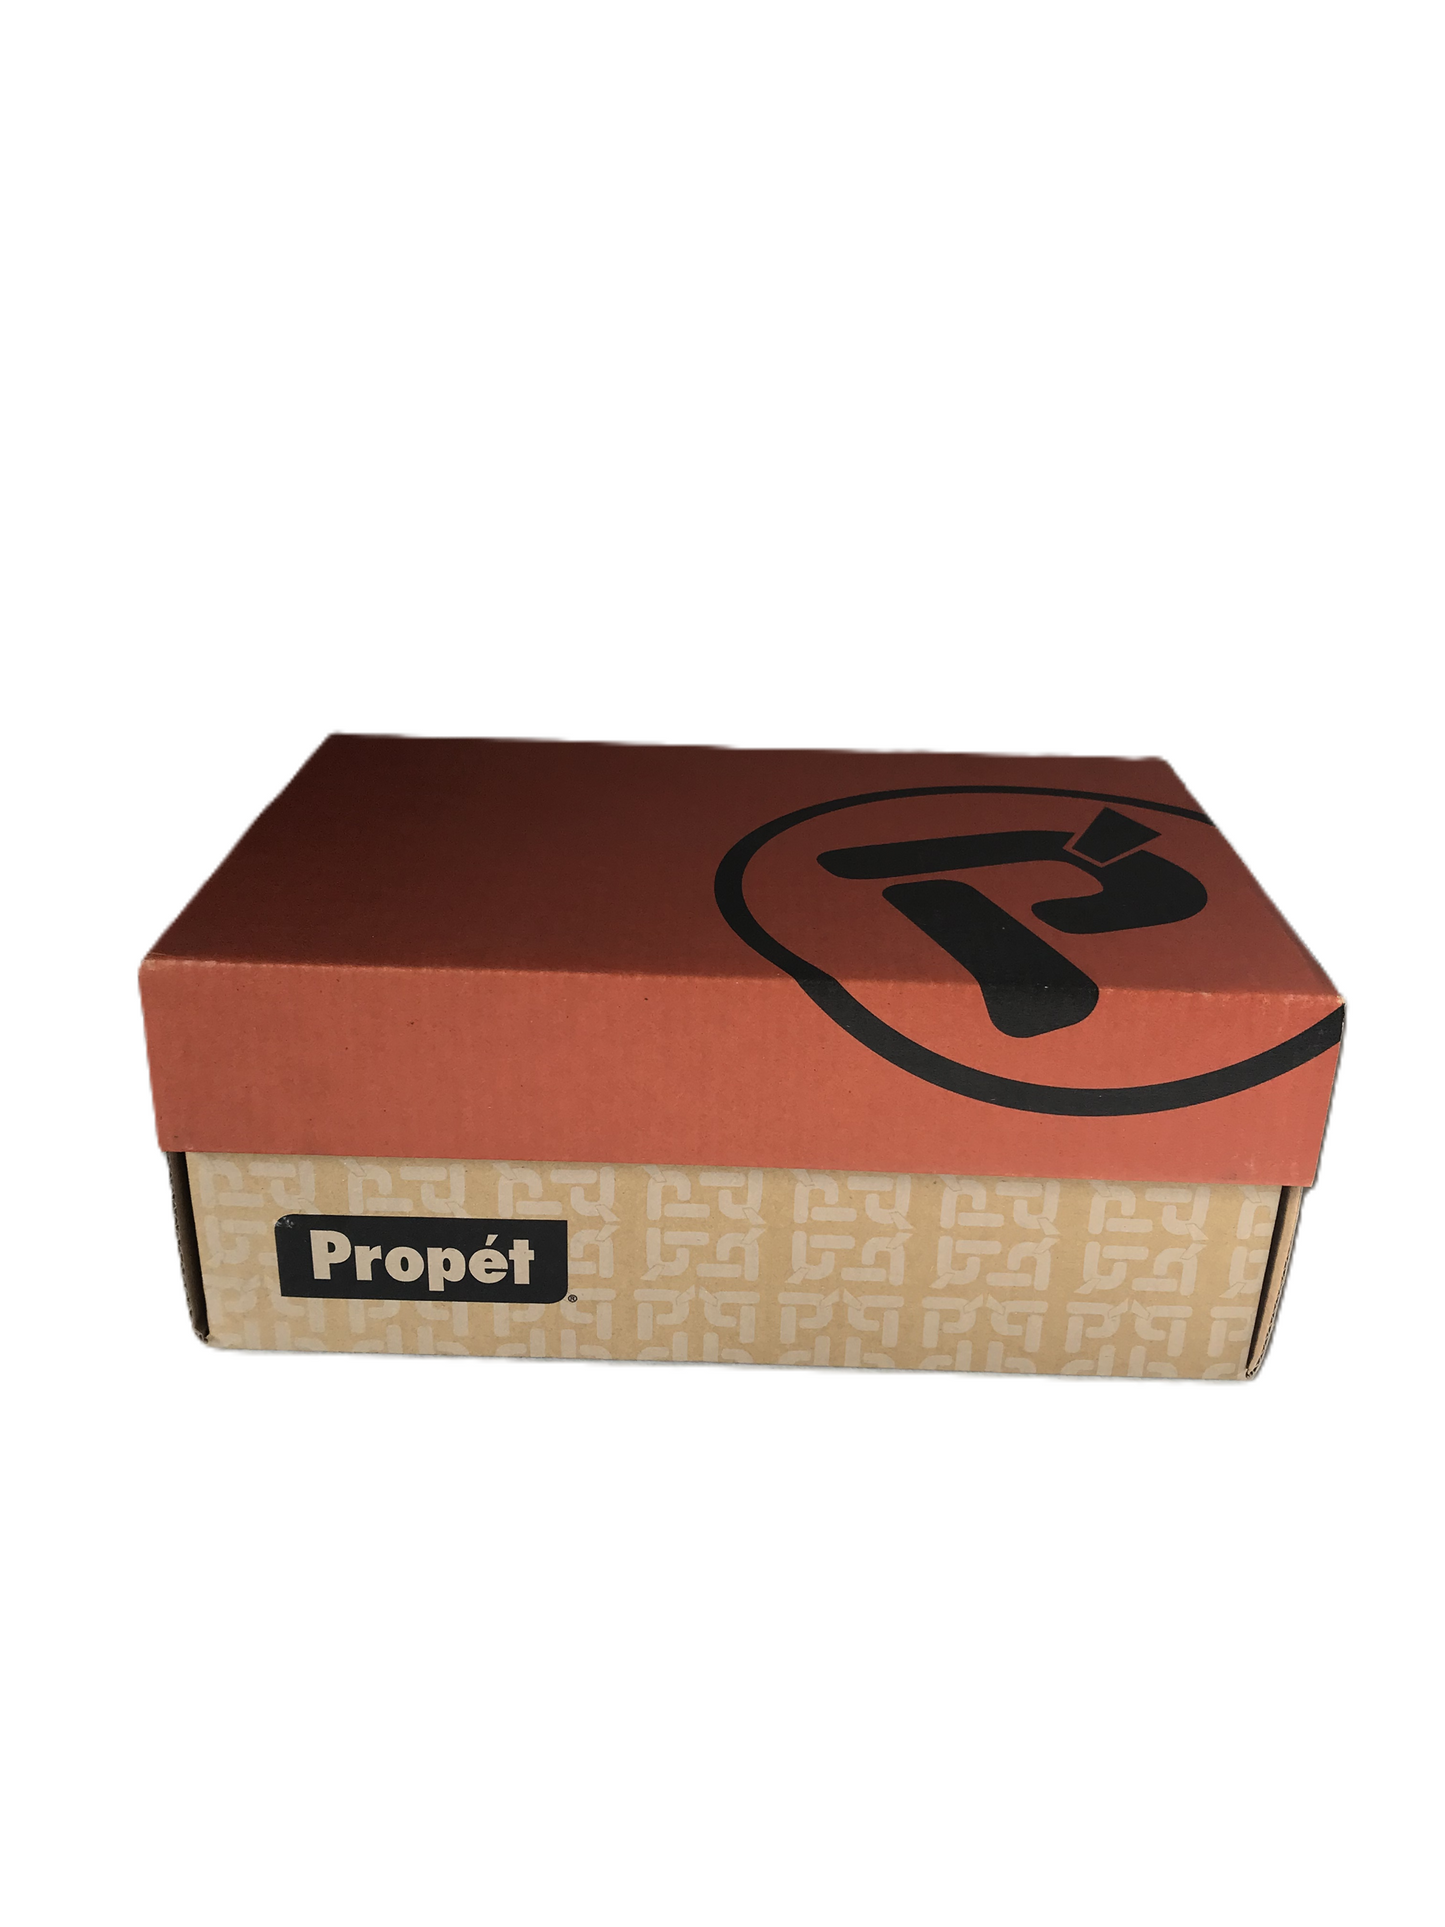 Shoes Flats By Propet Size: 7